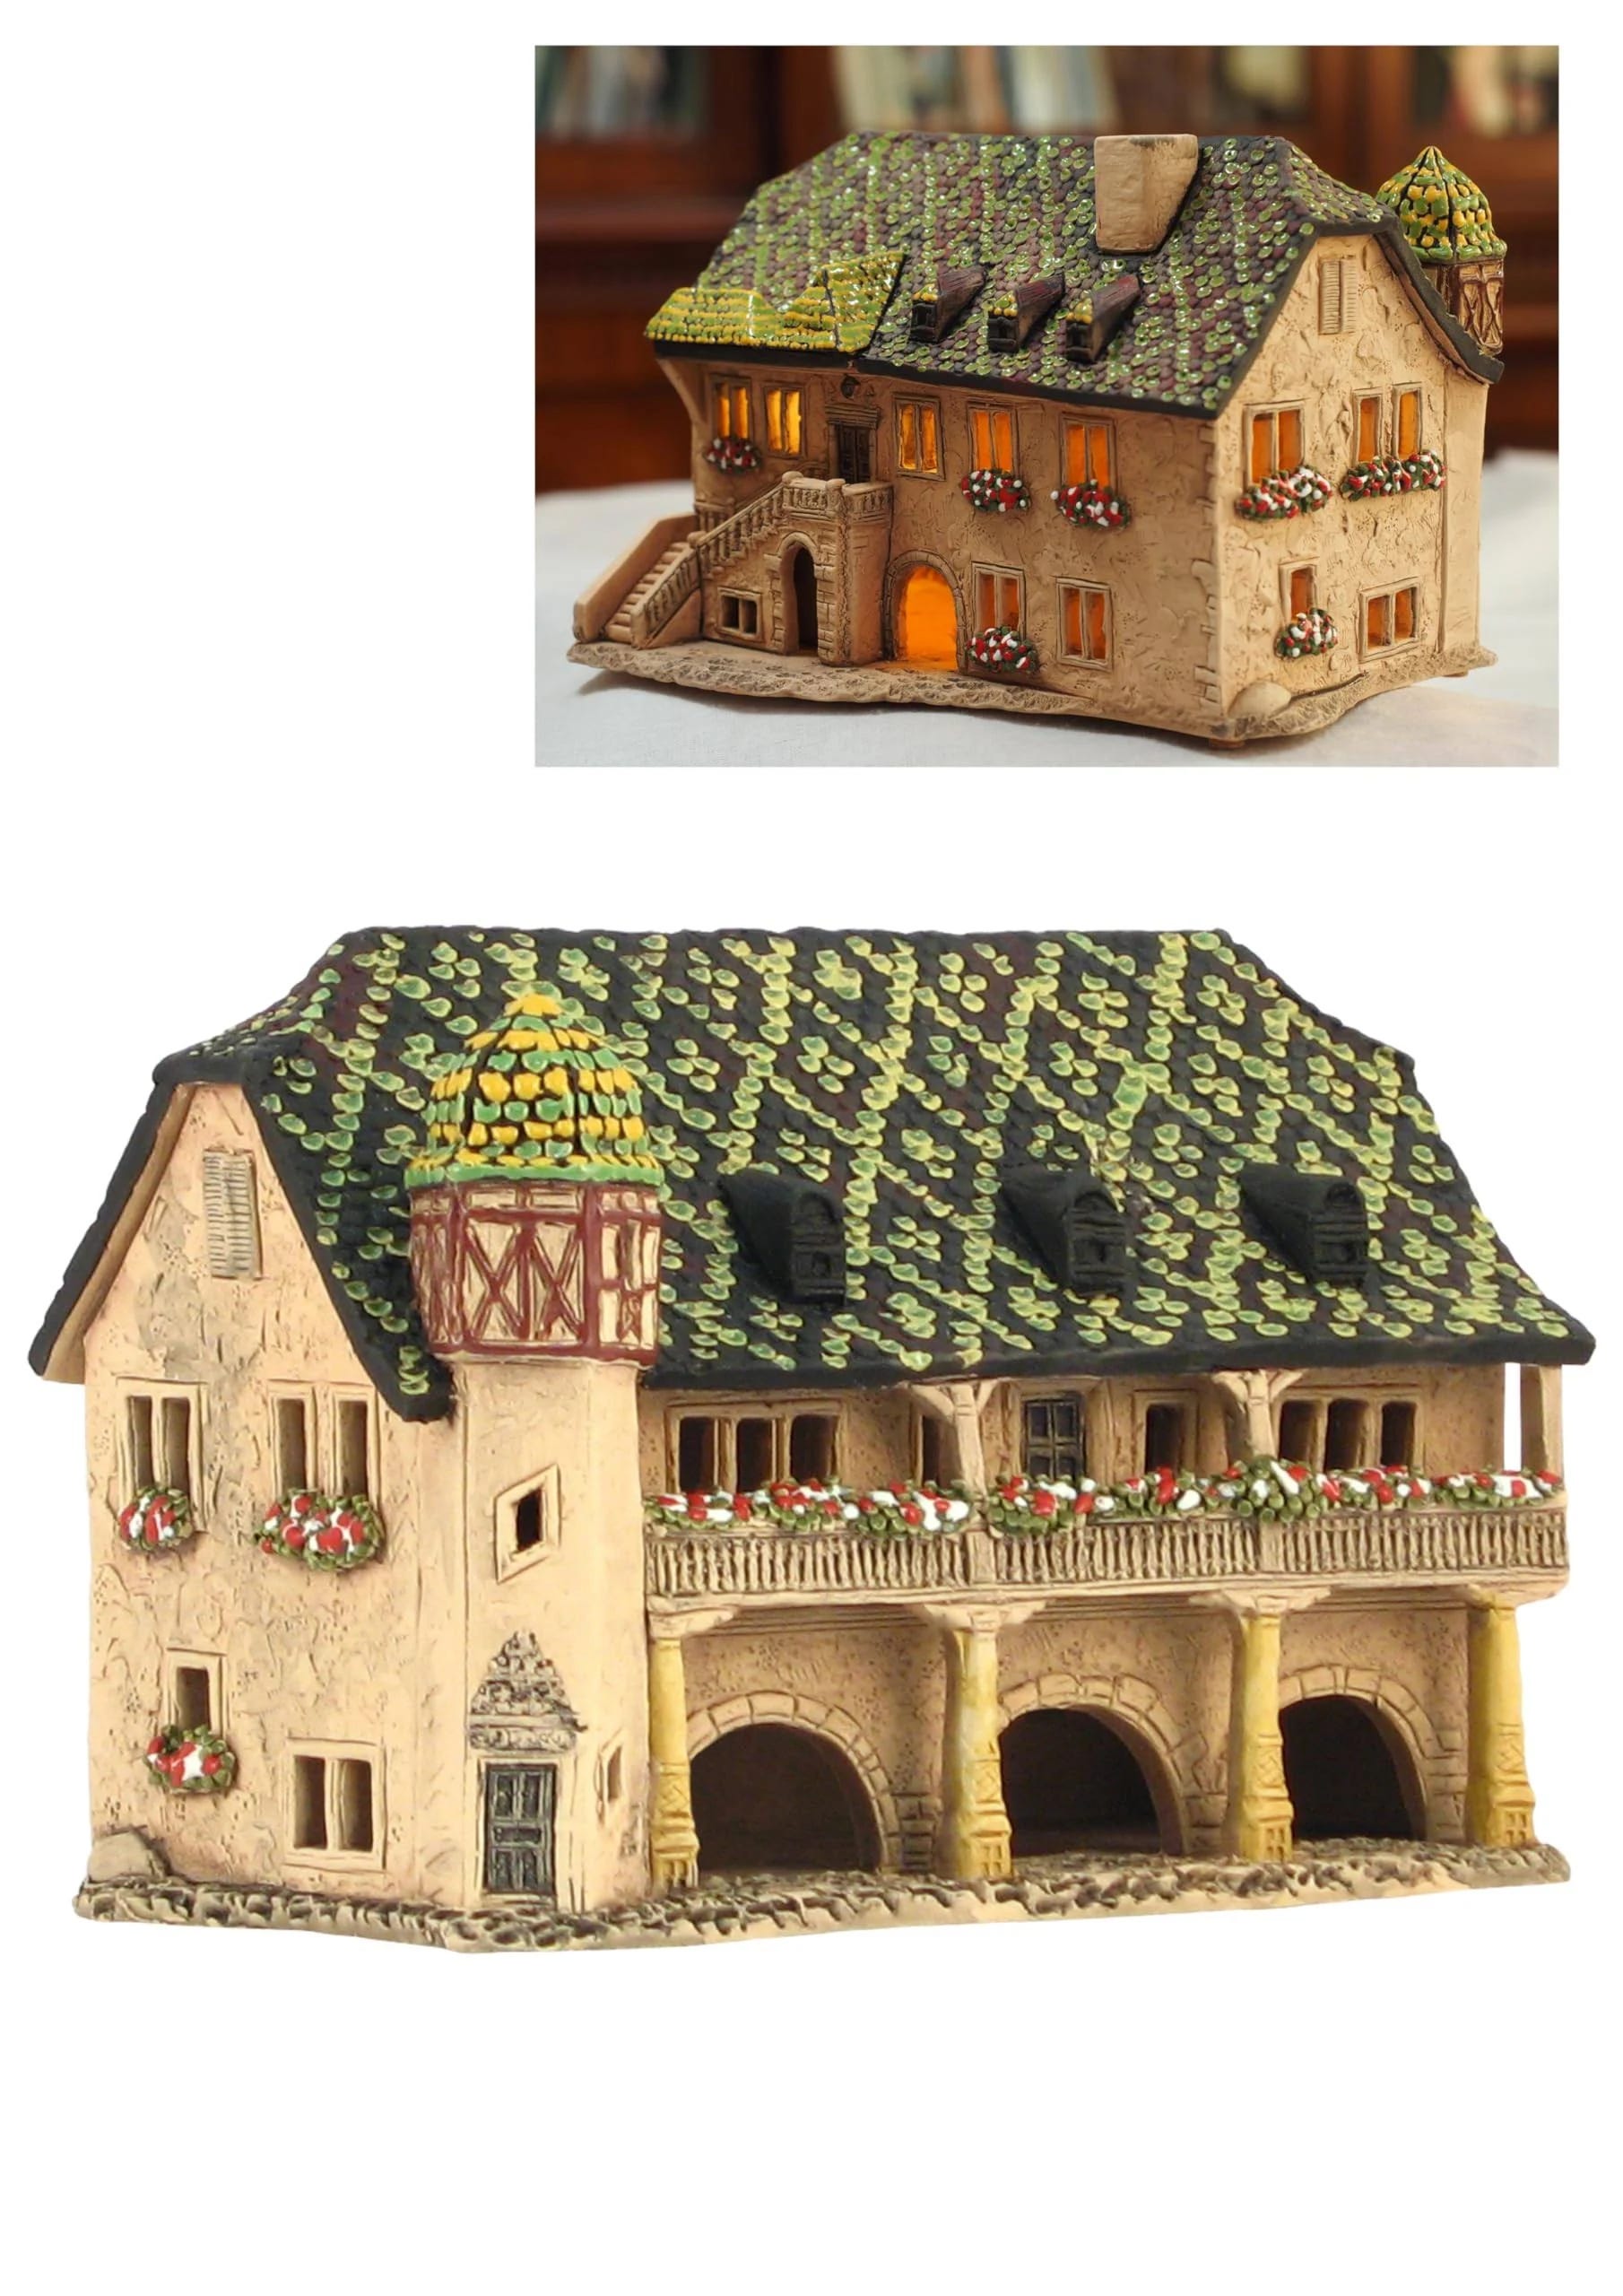 Midene Ceramic Christmas Village: Zollhaus of Colmar, Alsace - Collectible Miniature House | Image